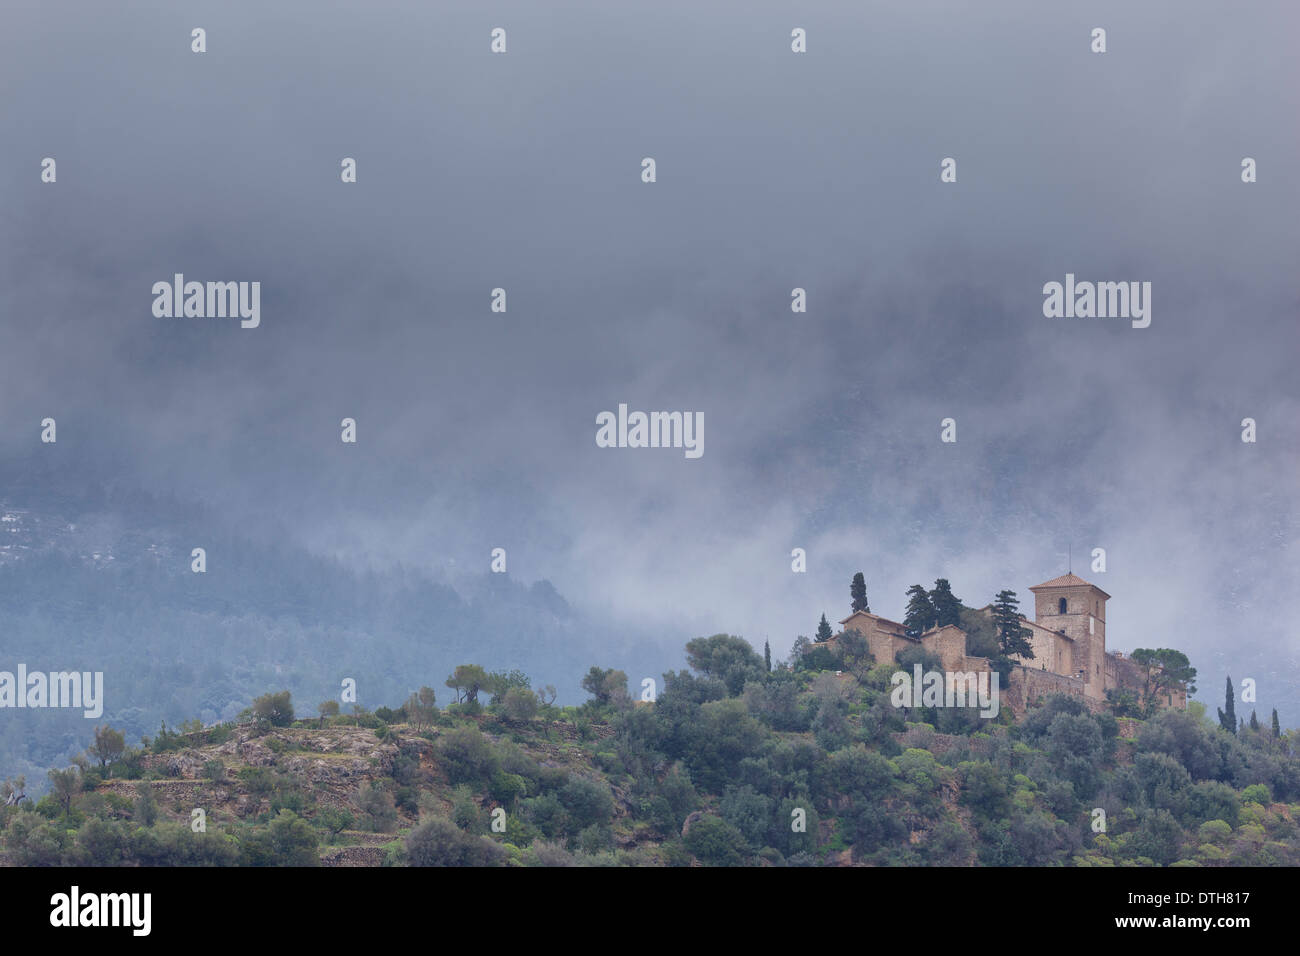 Church of Deià and Tramuntana mountains in the background shrouded in mist. Wintertime. Majorca, Balearic islands, Spain Stock Photo